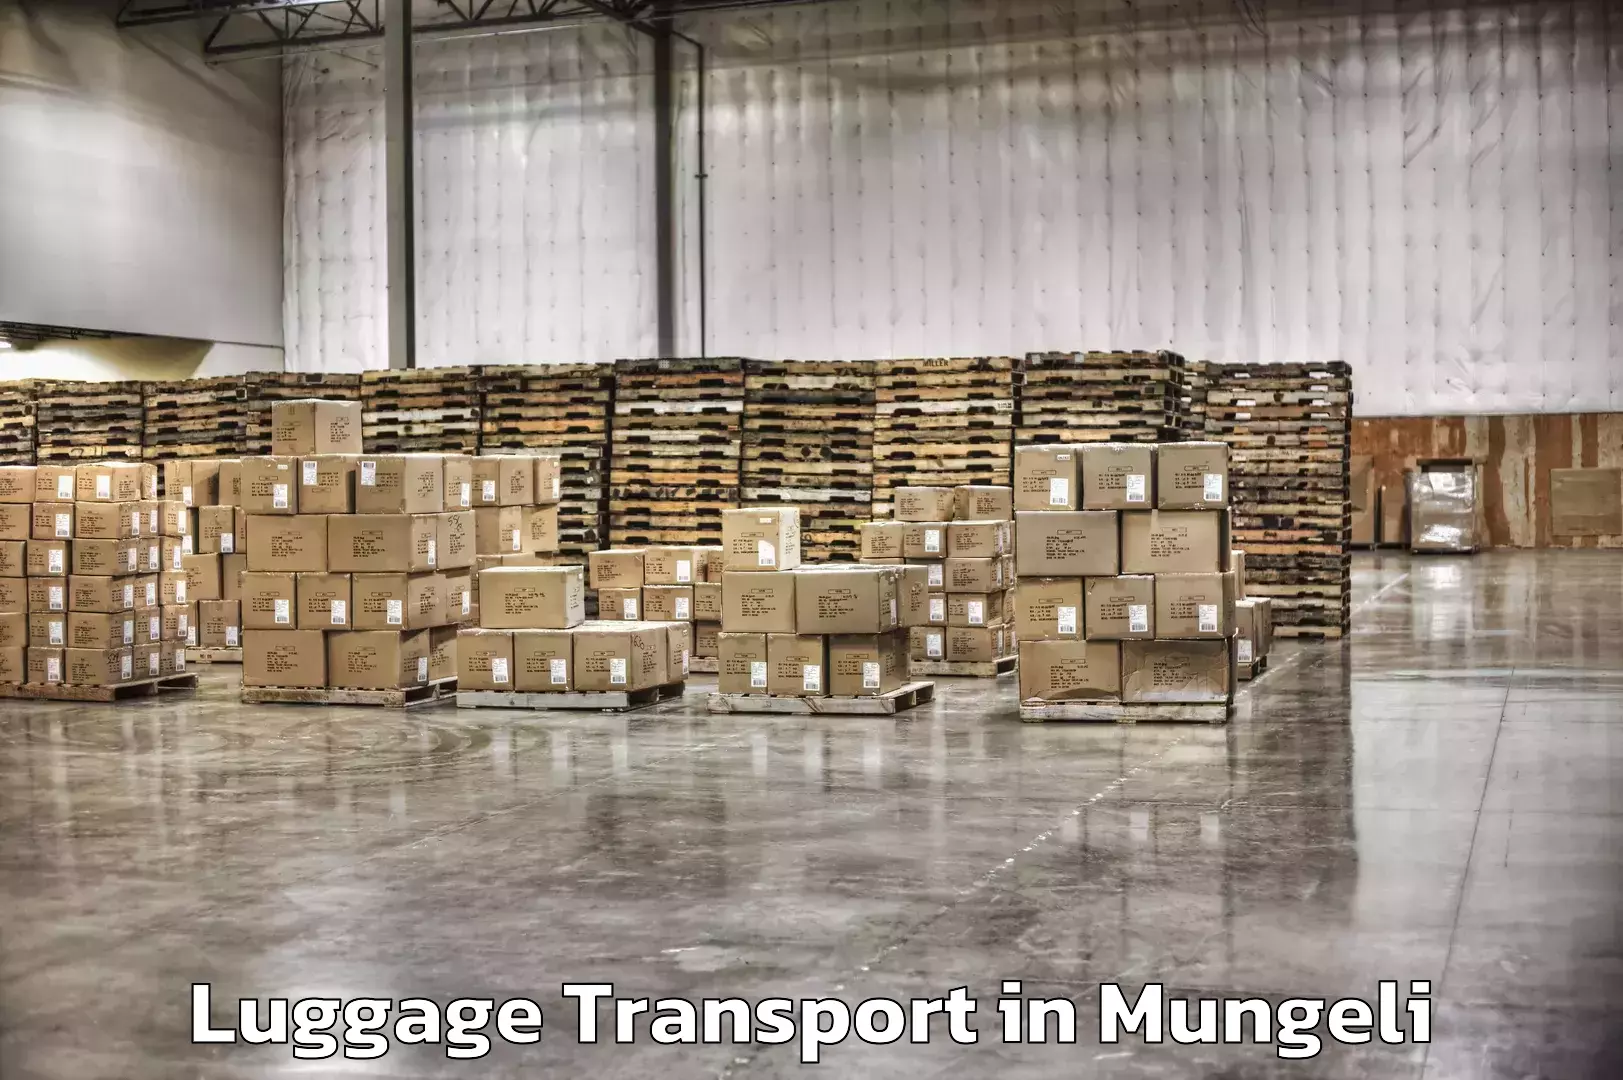 Luggage shipping trends in Mungeli